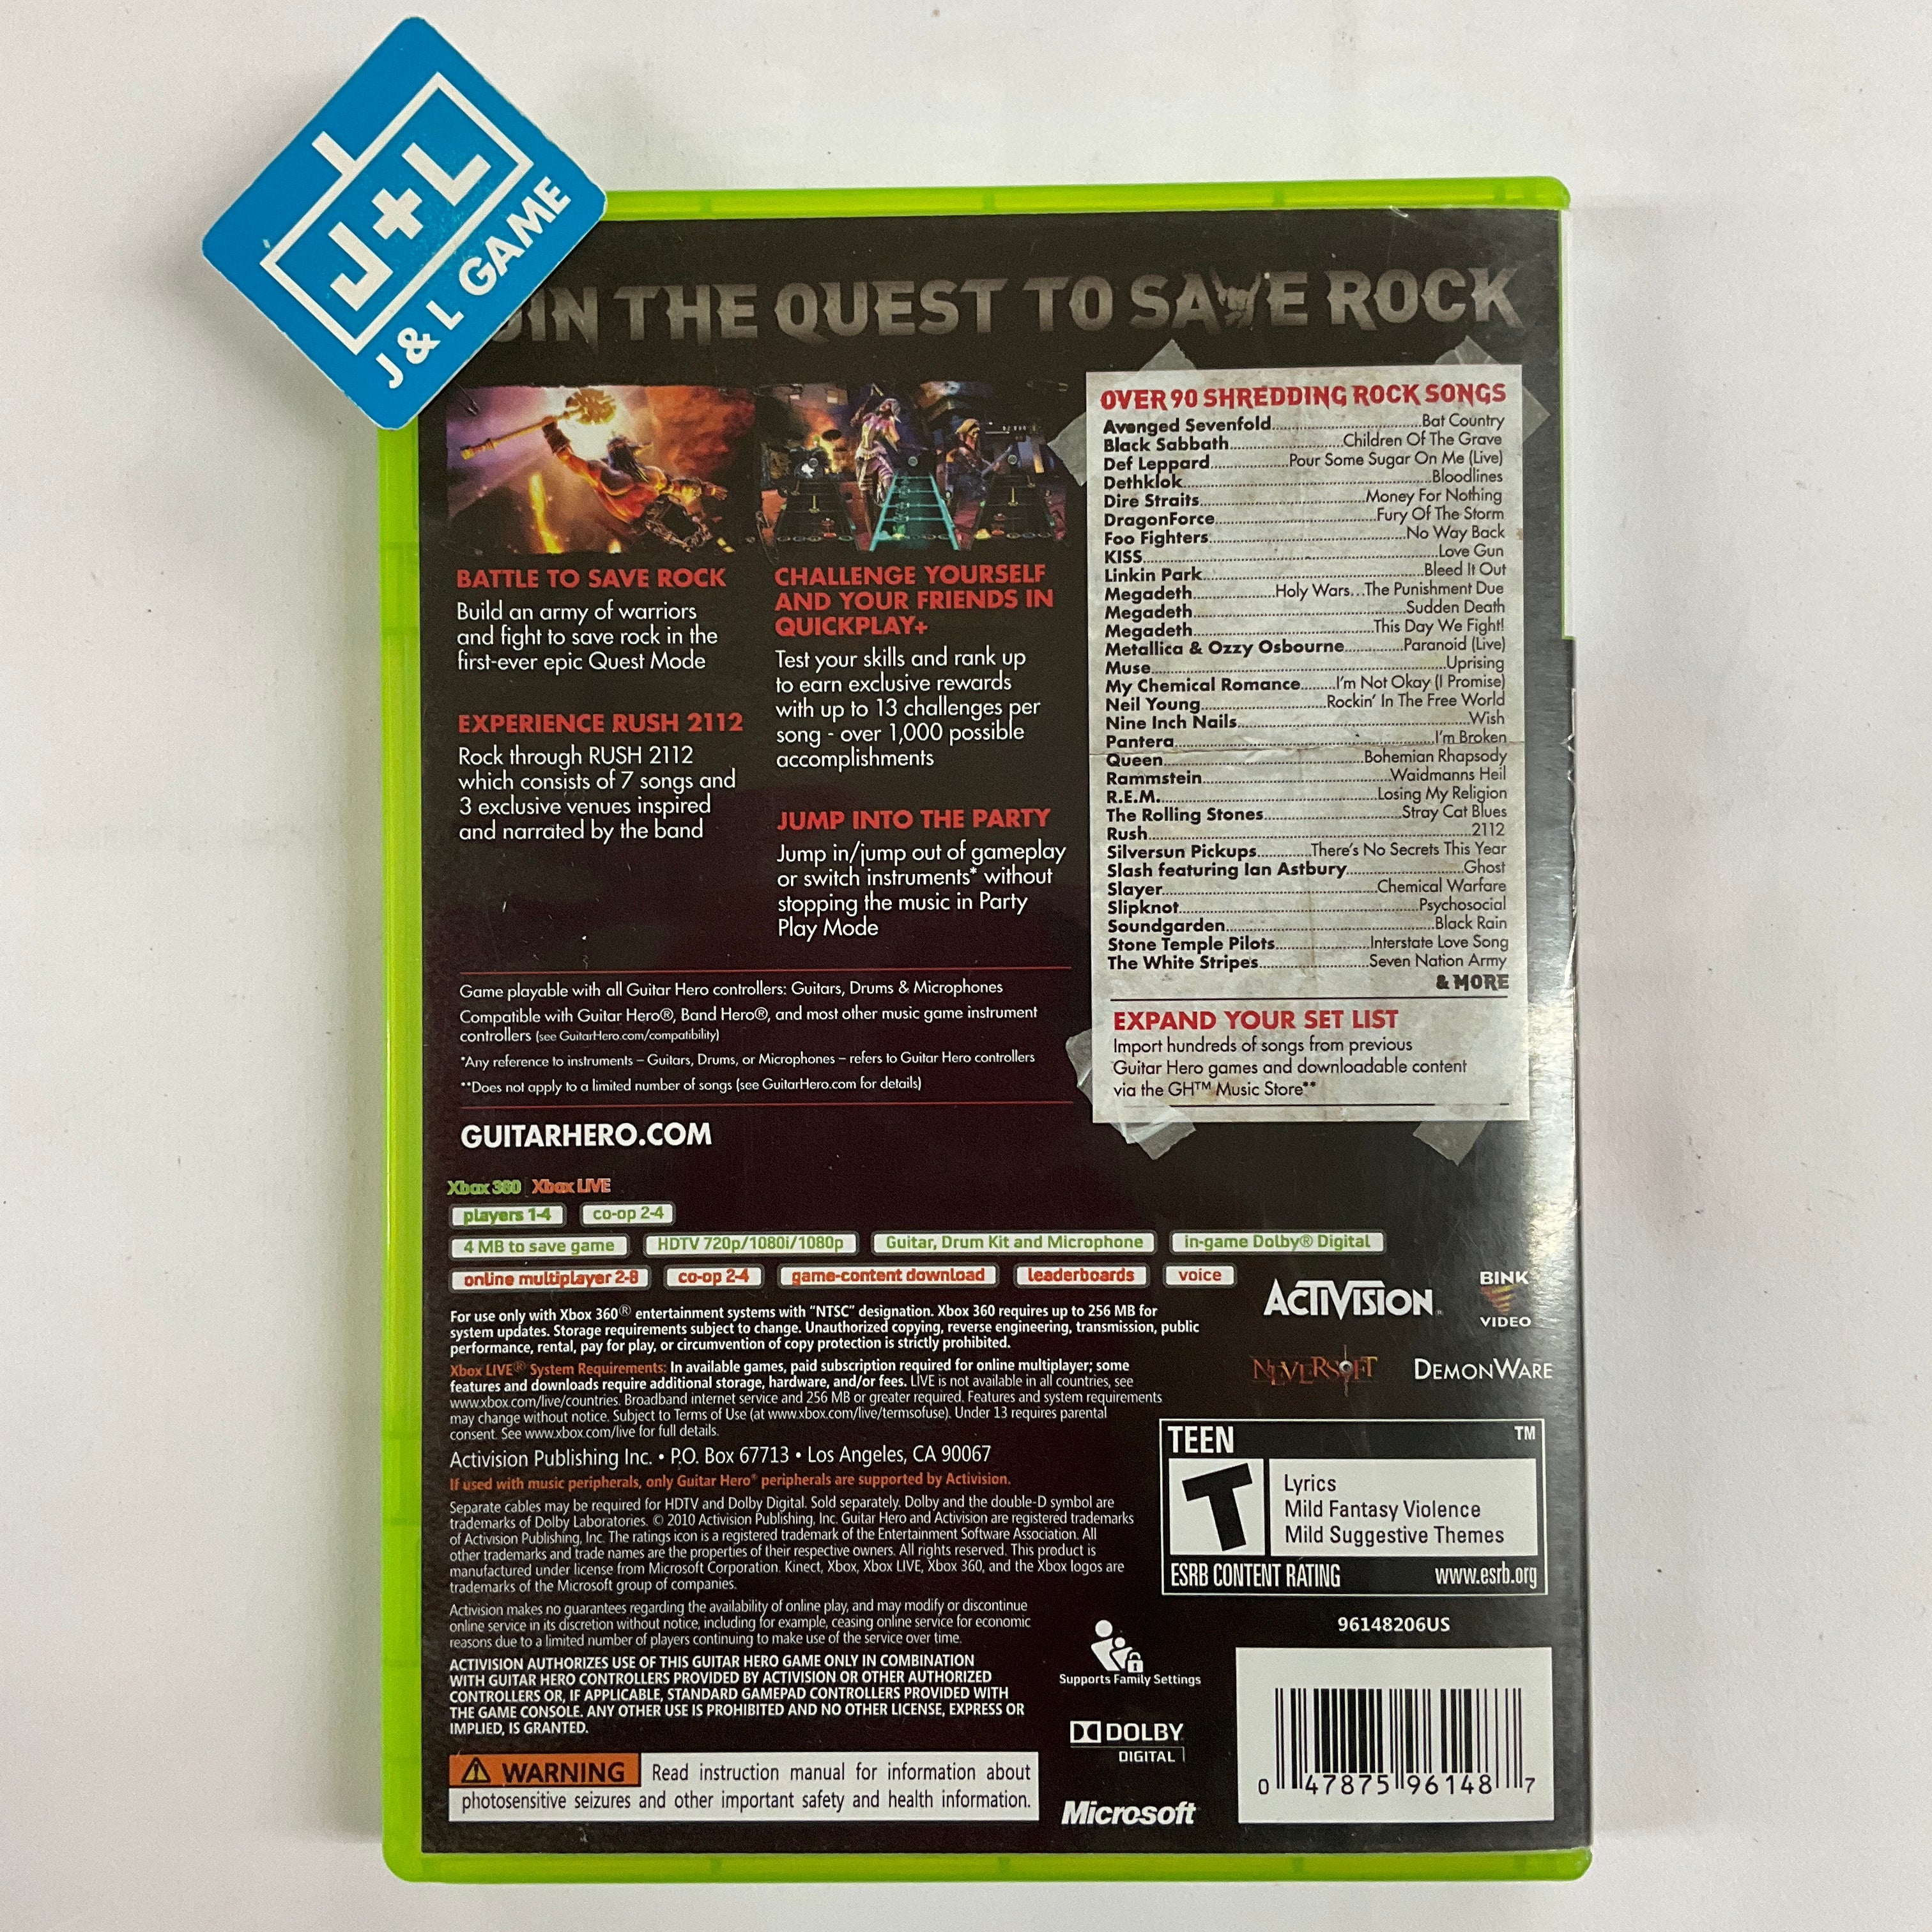 Guitar Hero: Warriors of Rock - (X360) Xbox 360 [Pre-Owned] Video Games ACTIVISION   